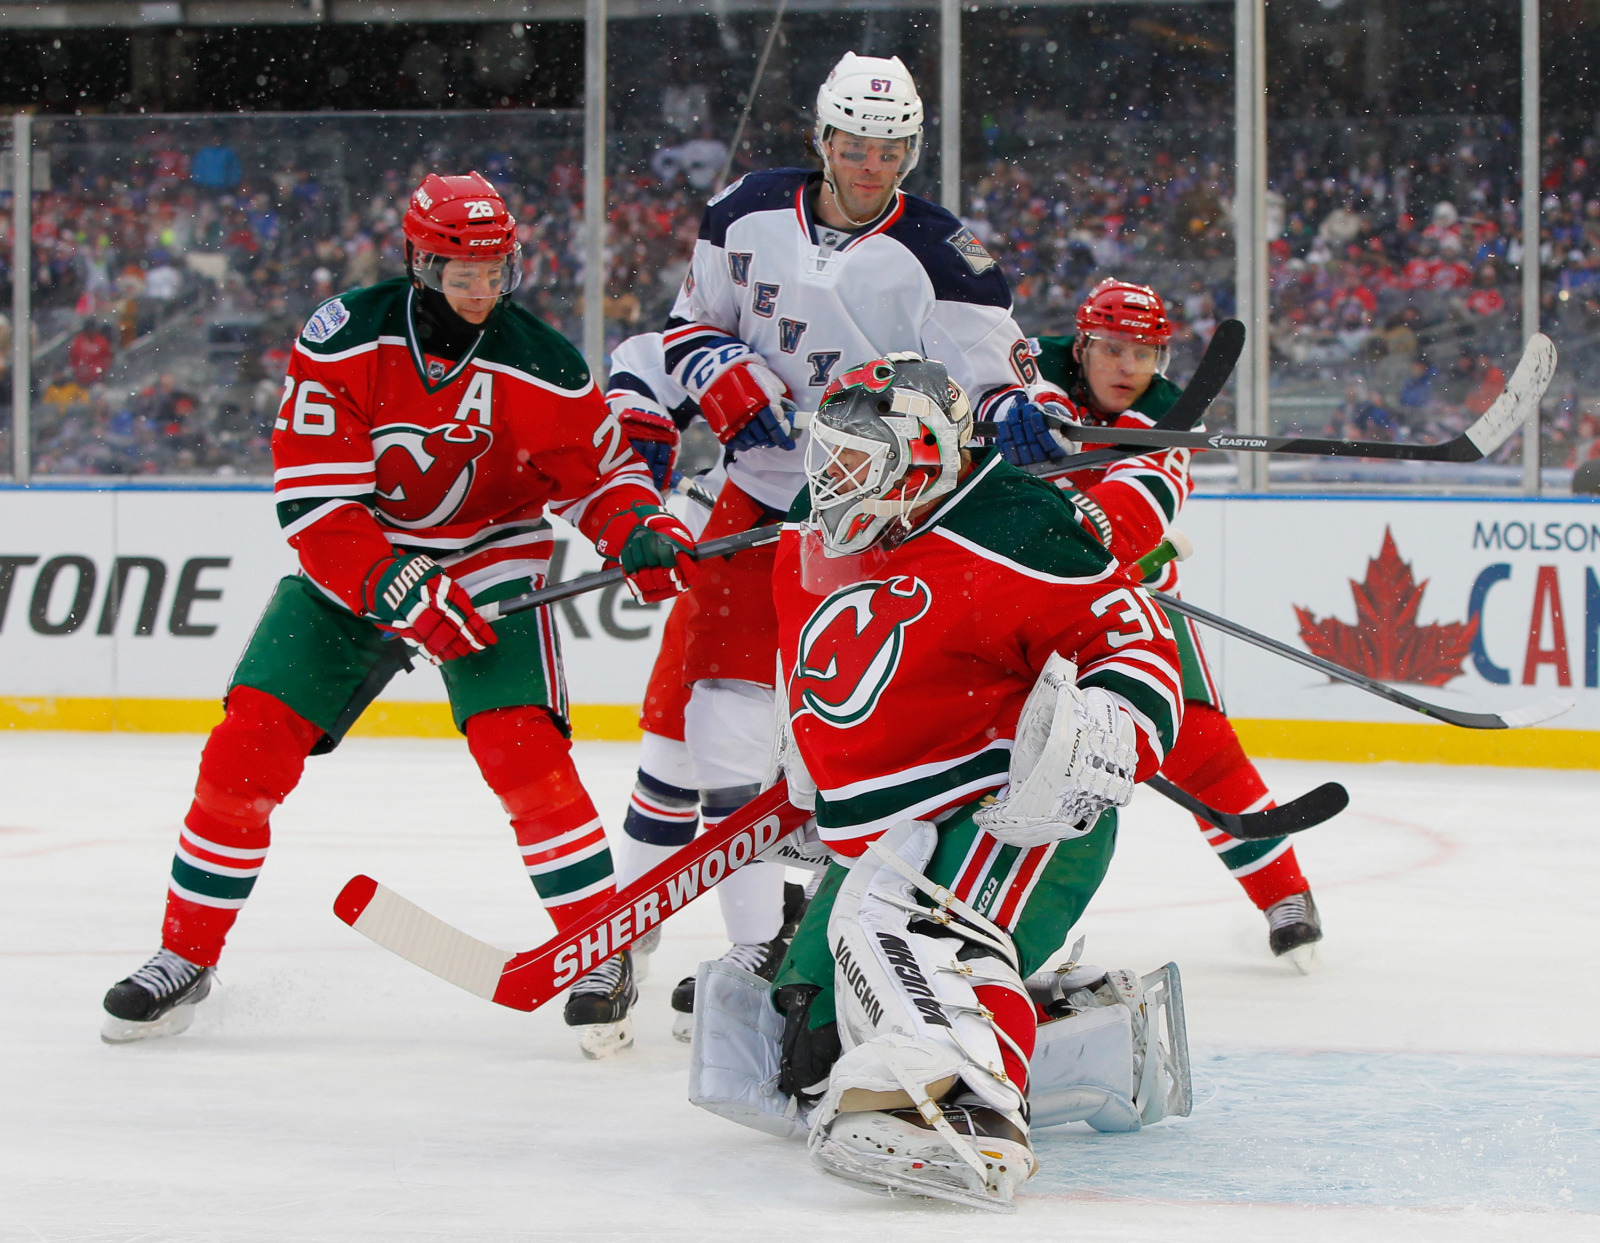 Controversy over red and green jerseys for the NJ Devils?